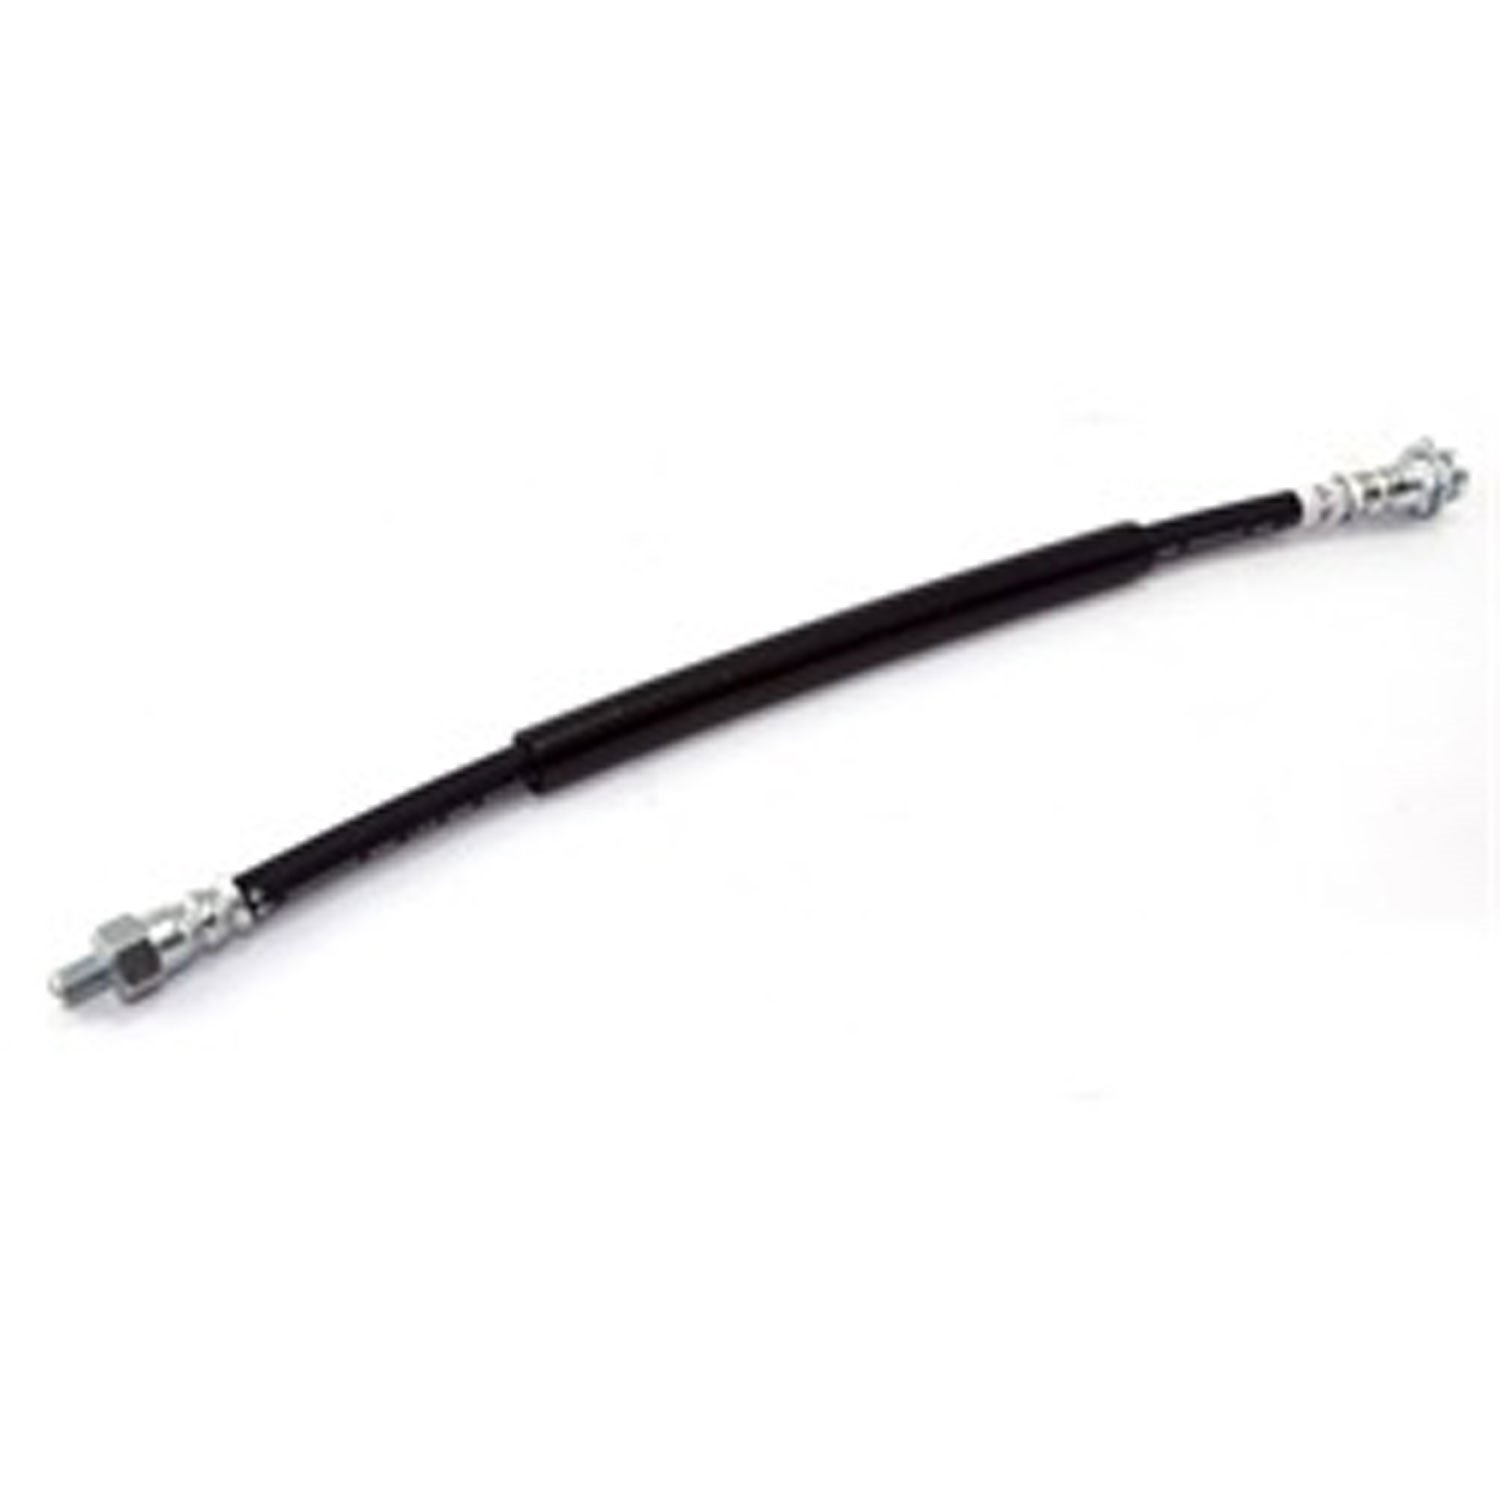 Replacement front brake hose from Omix-ADA, Fits 76-78